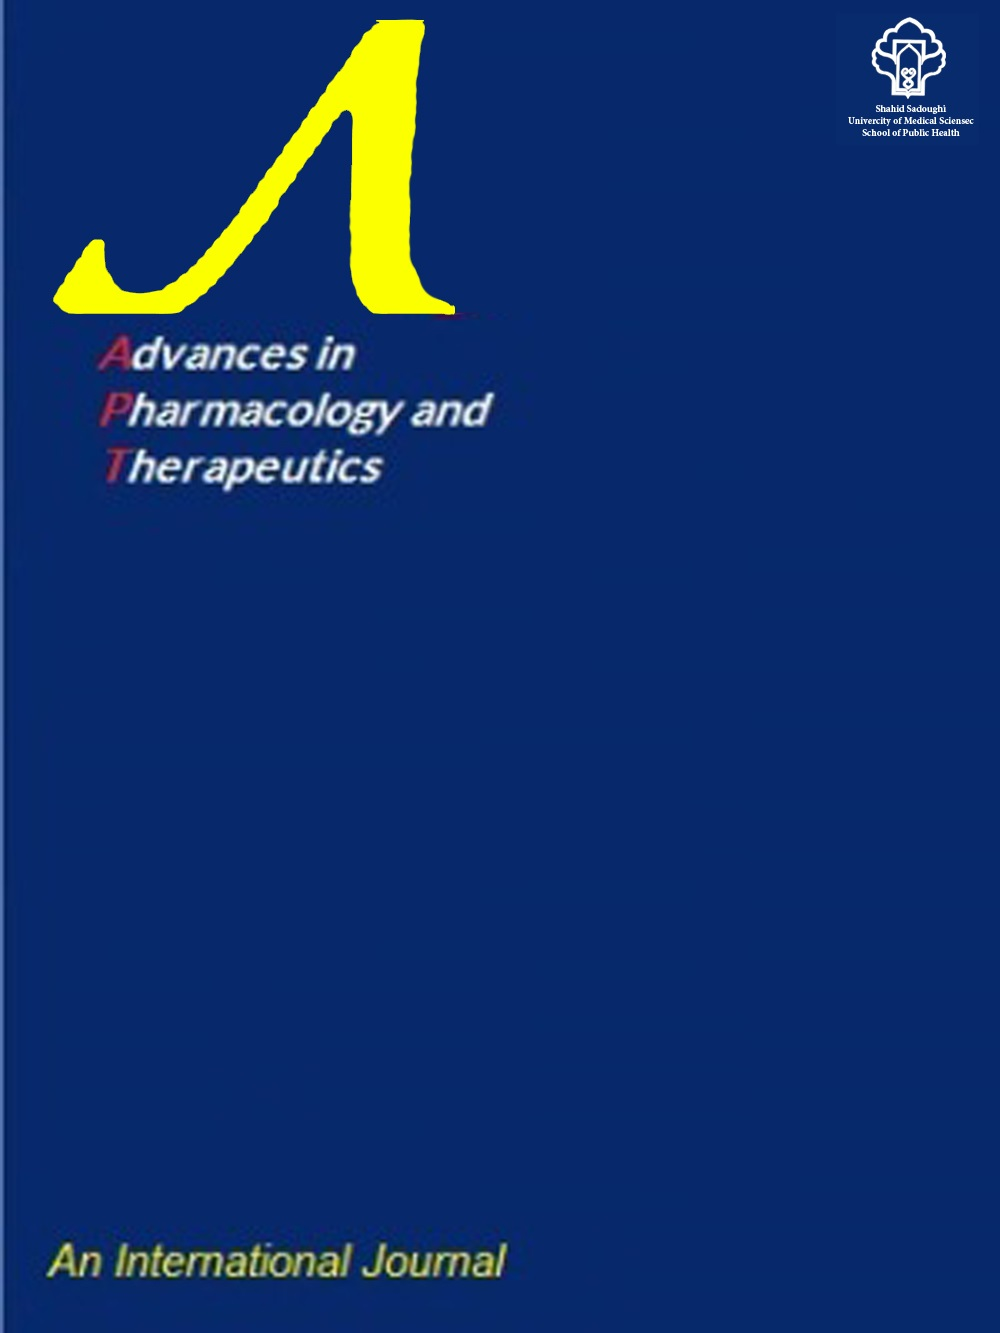 Advances in Pharmacology and Therapeutics Journal